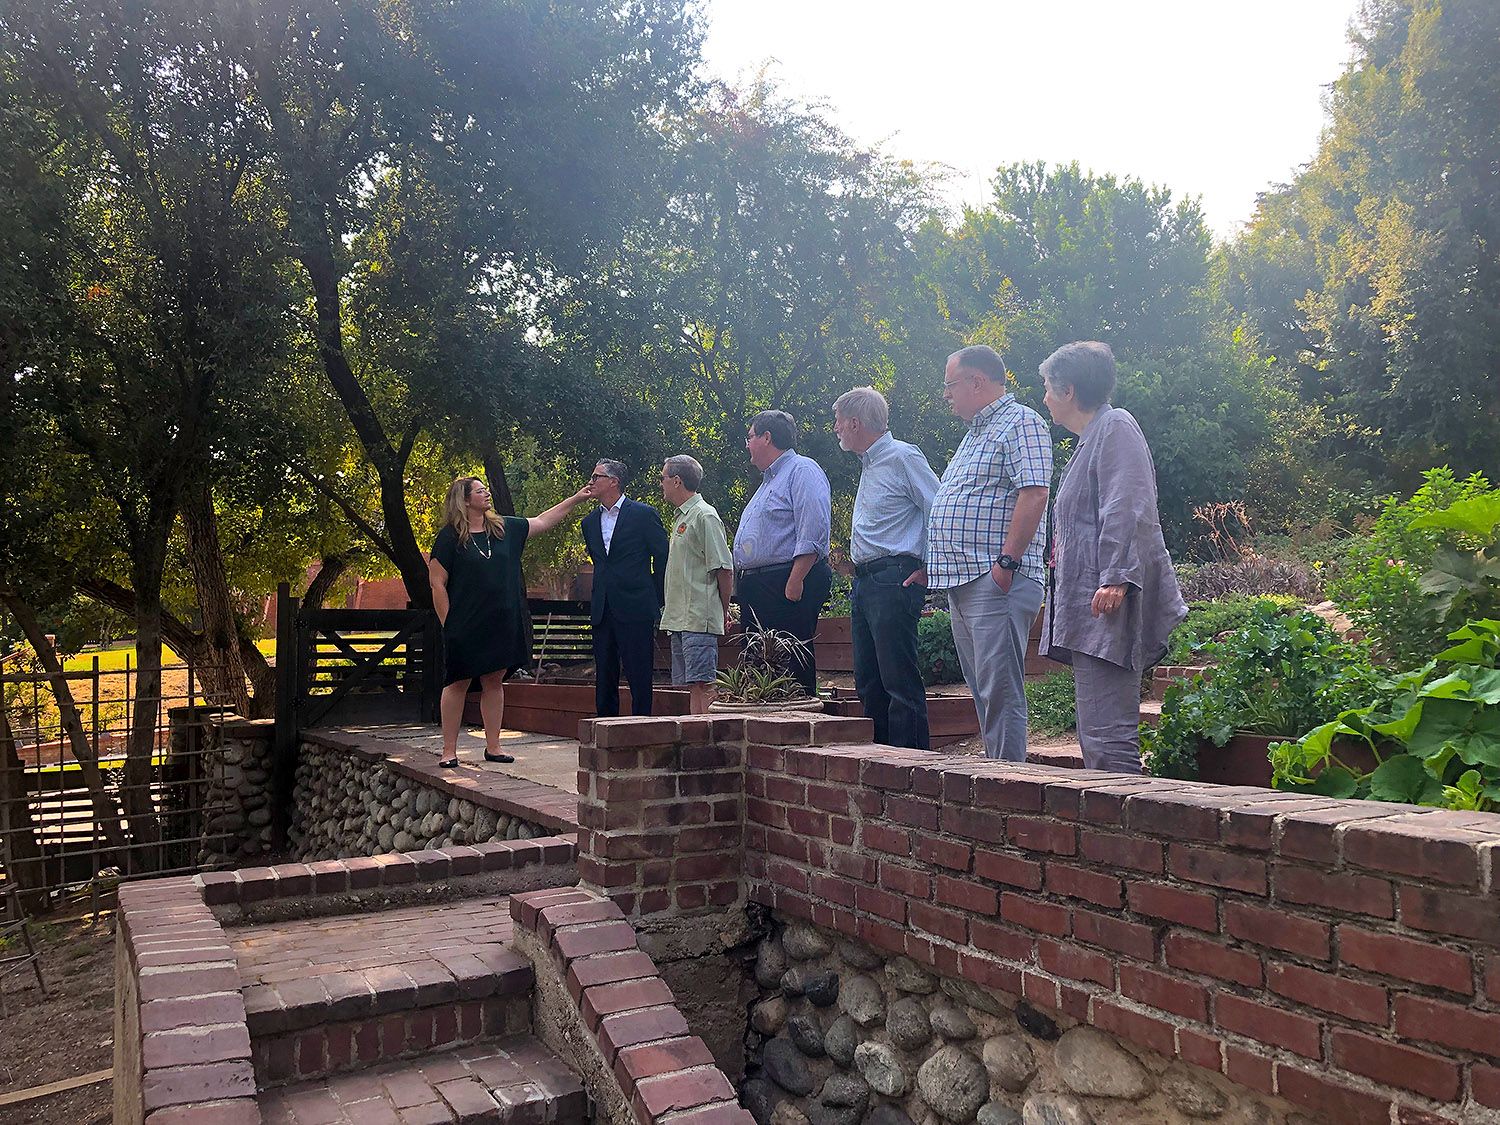 PHOTO: South Pasadena News | Lori Davis-Denny, on the backyard Greene & Greene steps, describes features of the Garfield House to members of the South Pasadena Preservation Foundation (SPPF).